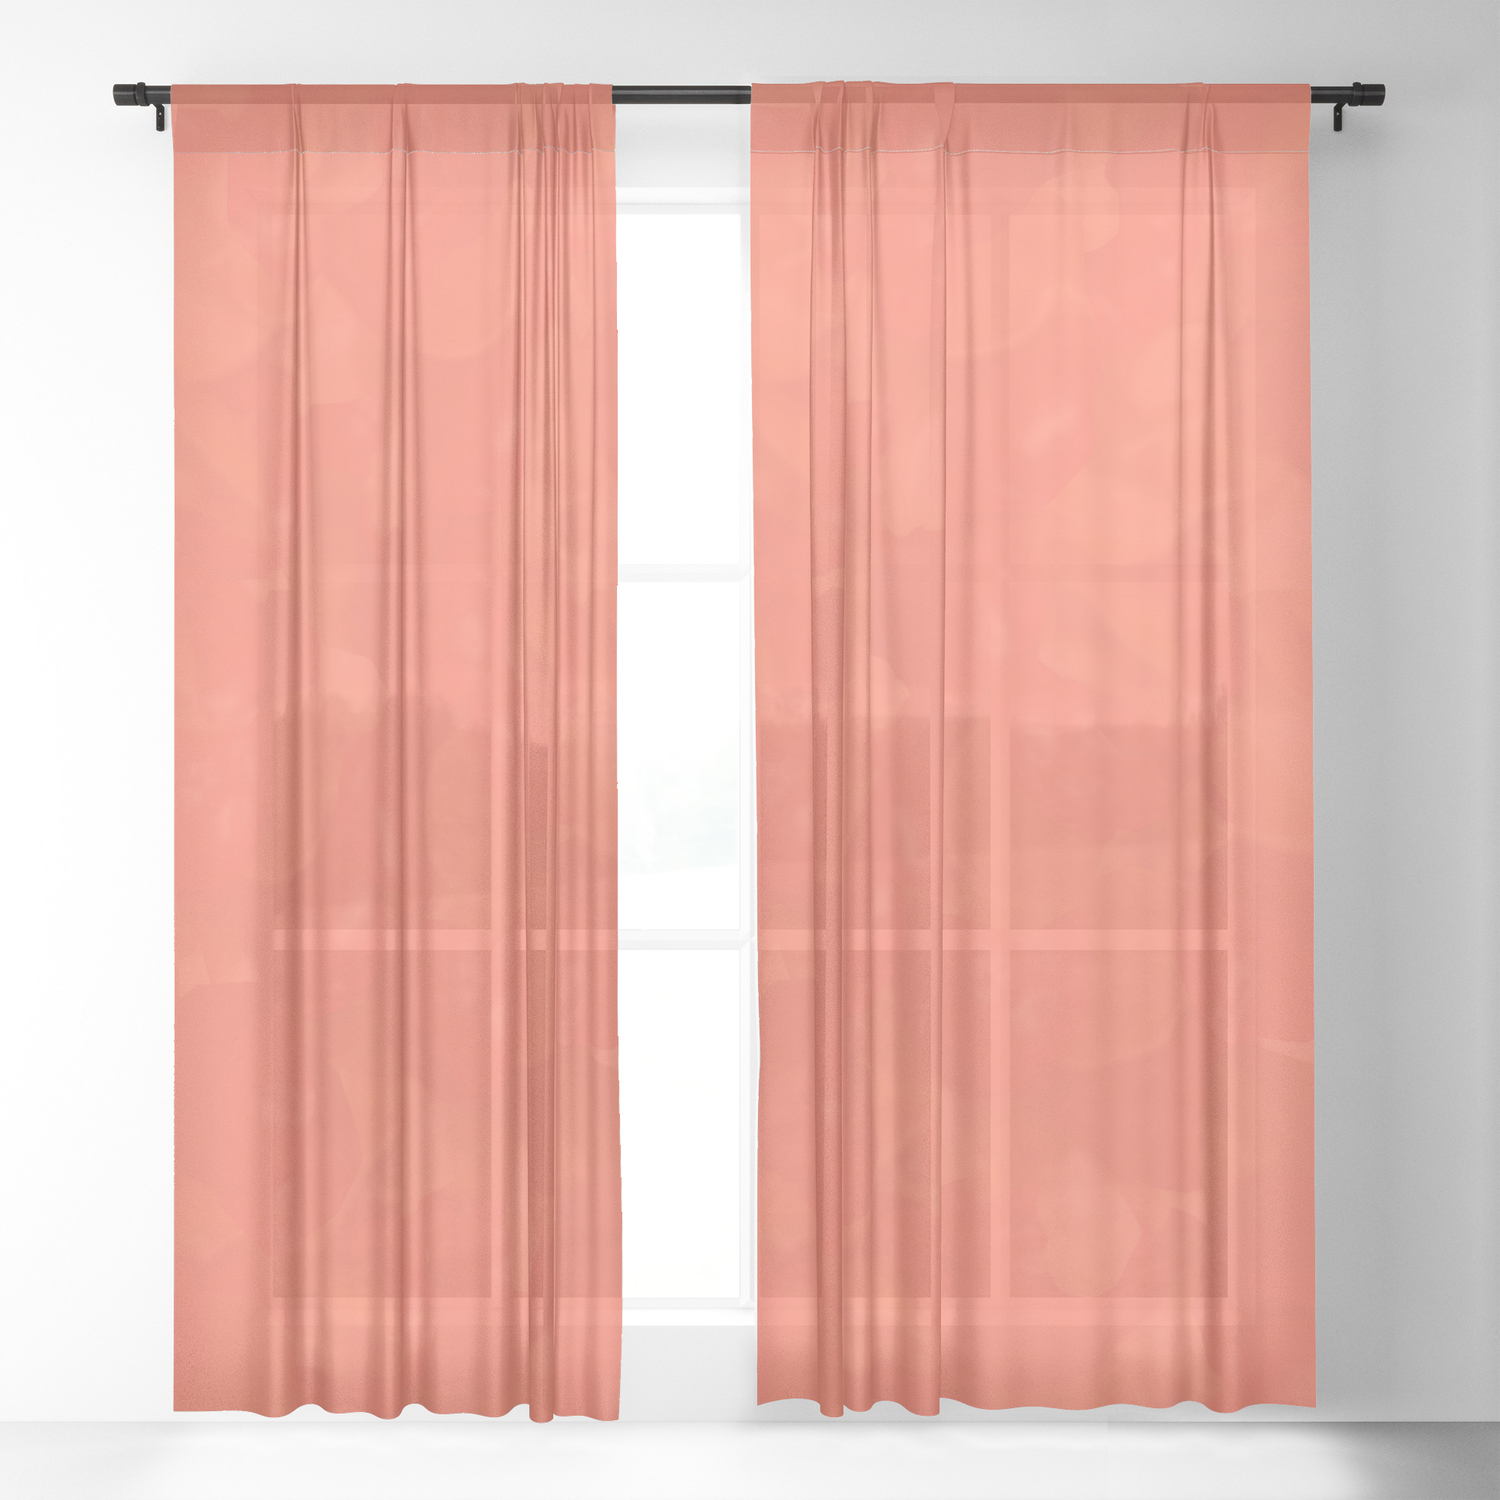 Detail Persimmon Curtains Nomer 46